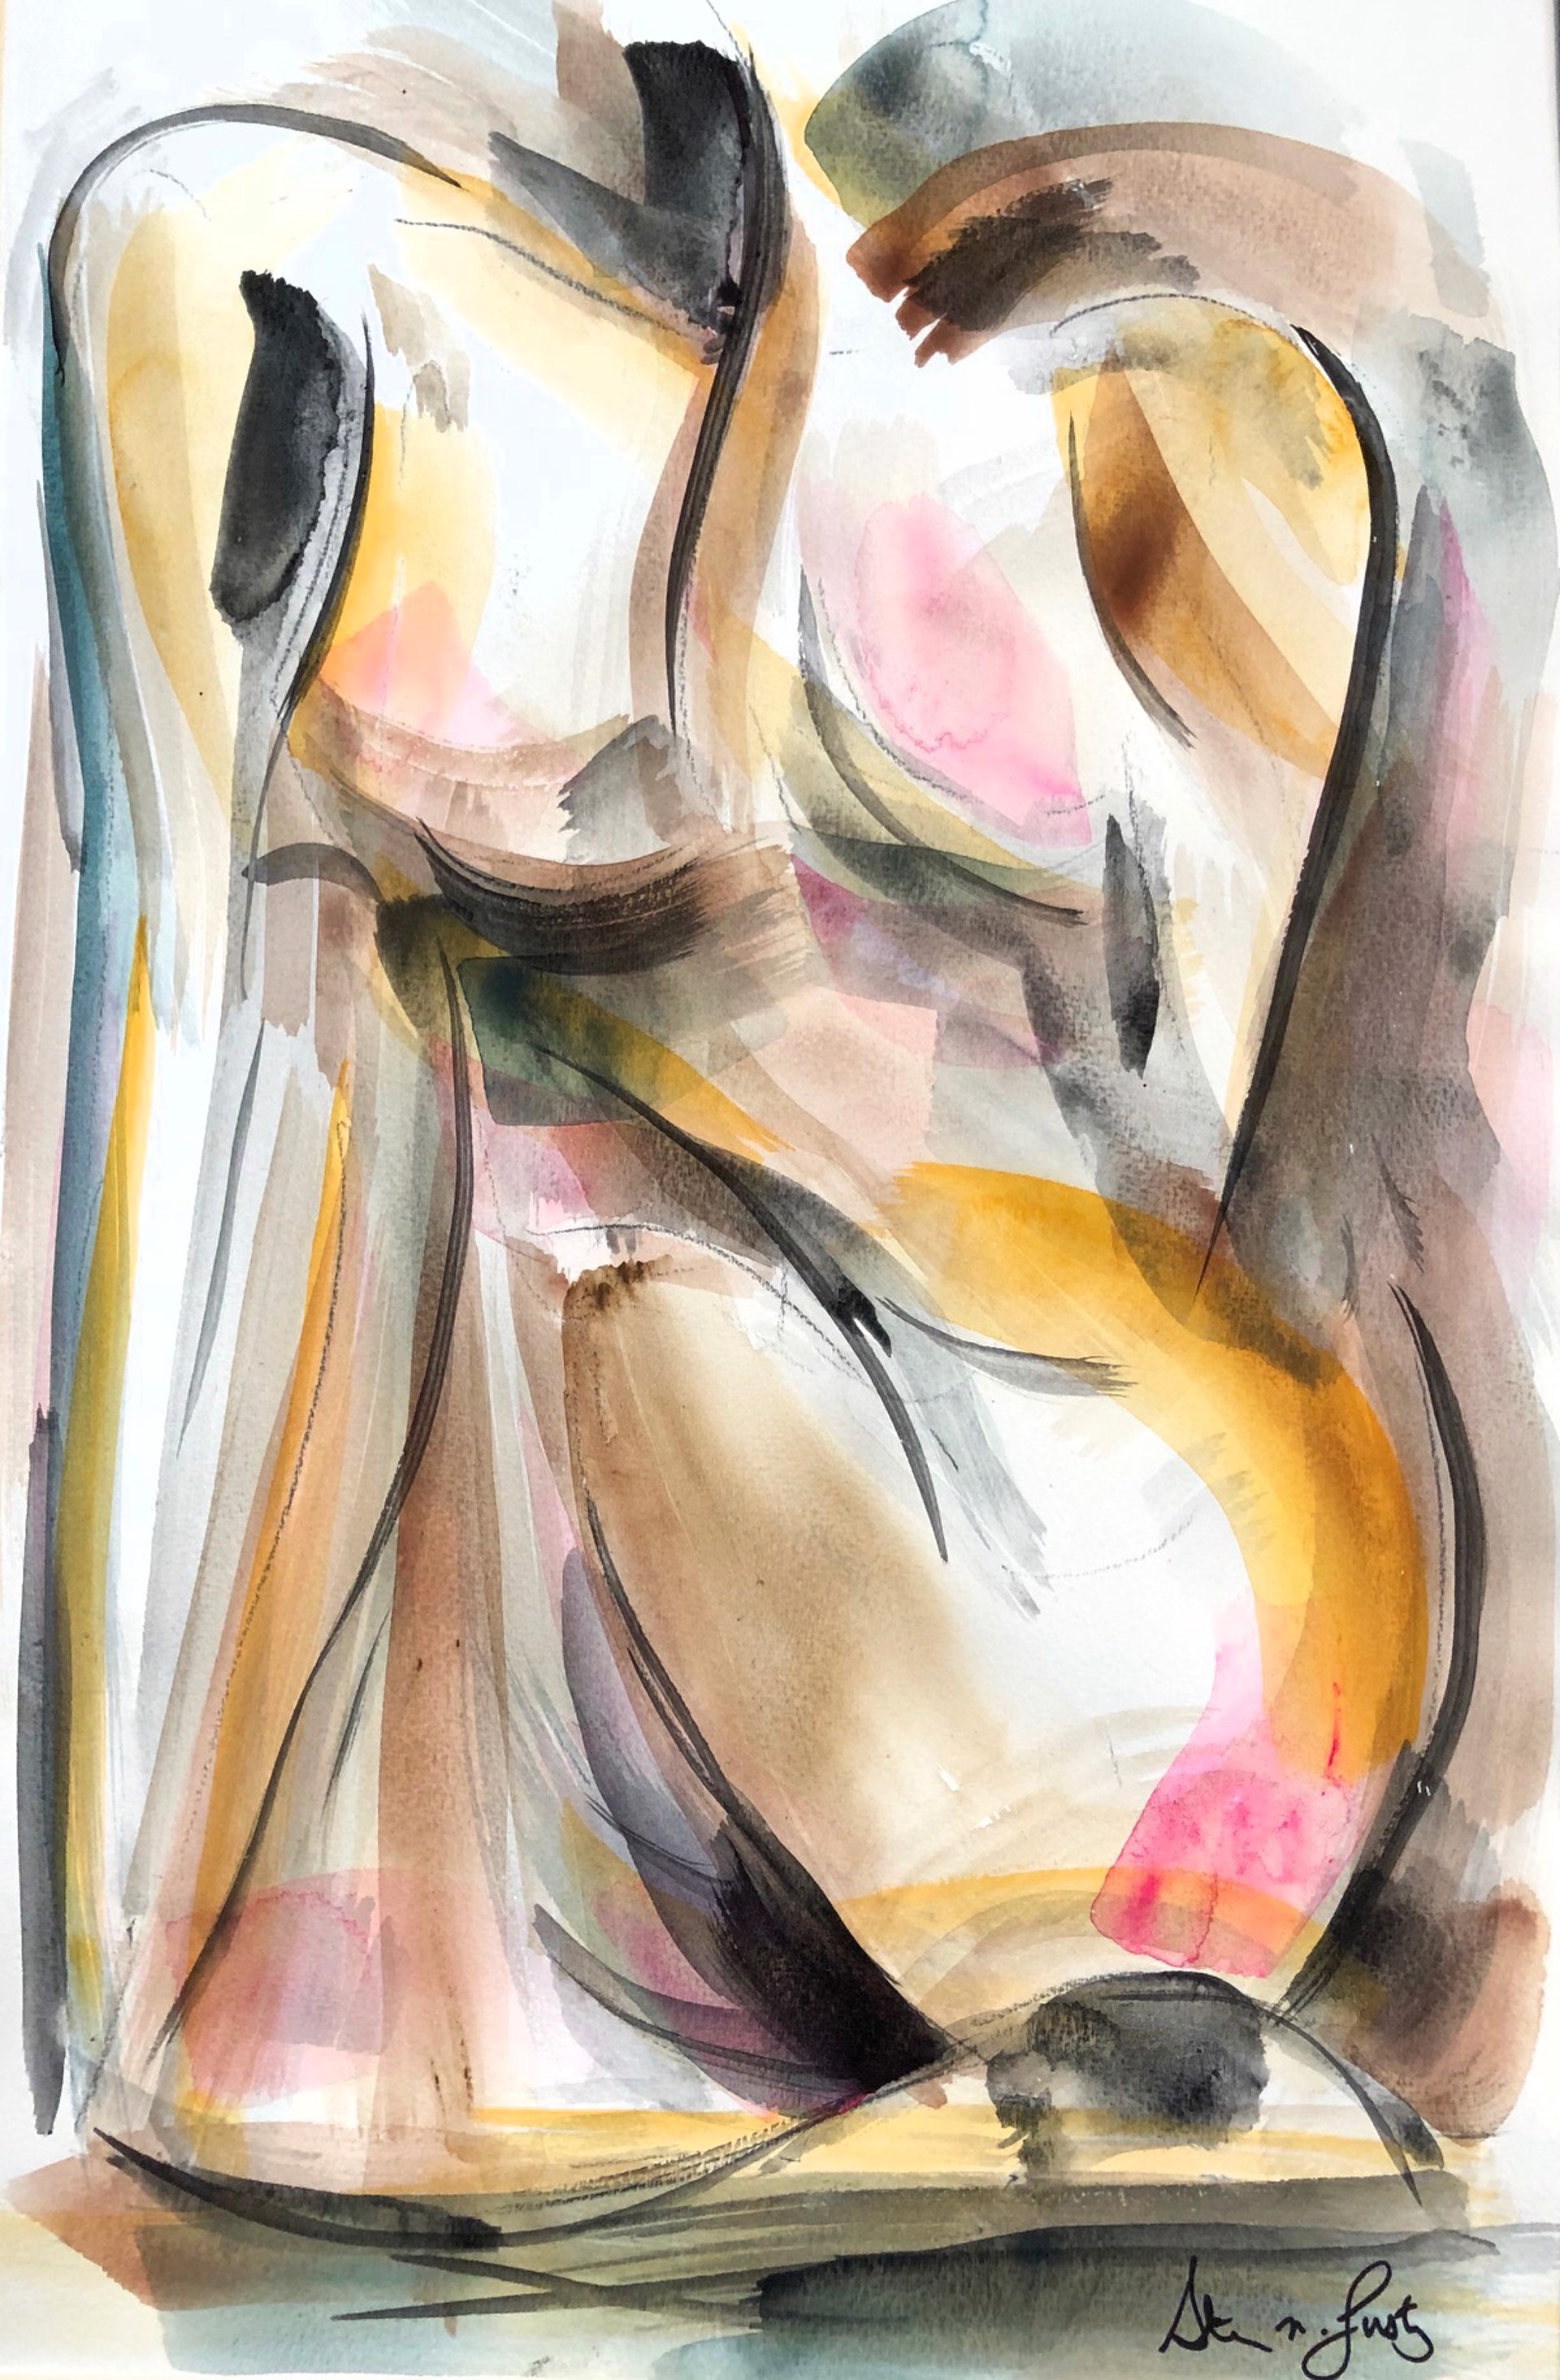 Untitled (Life Drawing) by Steven Lustig